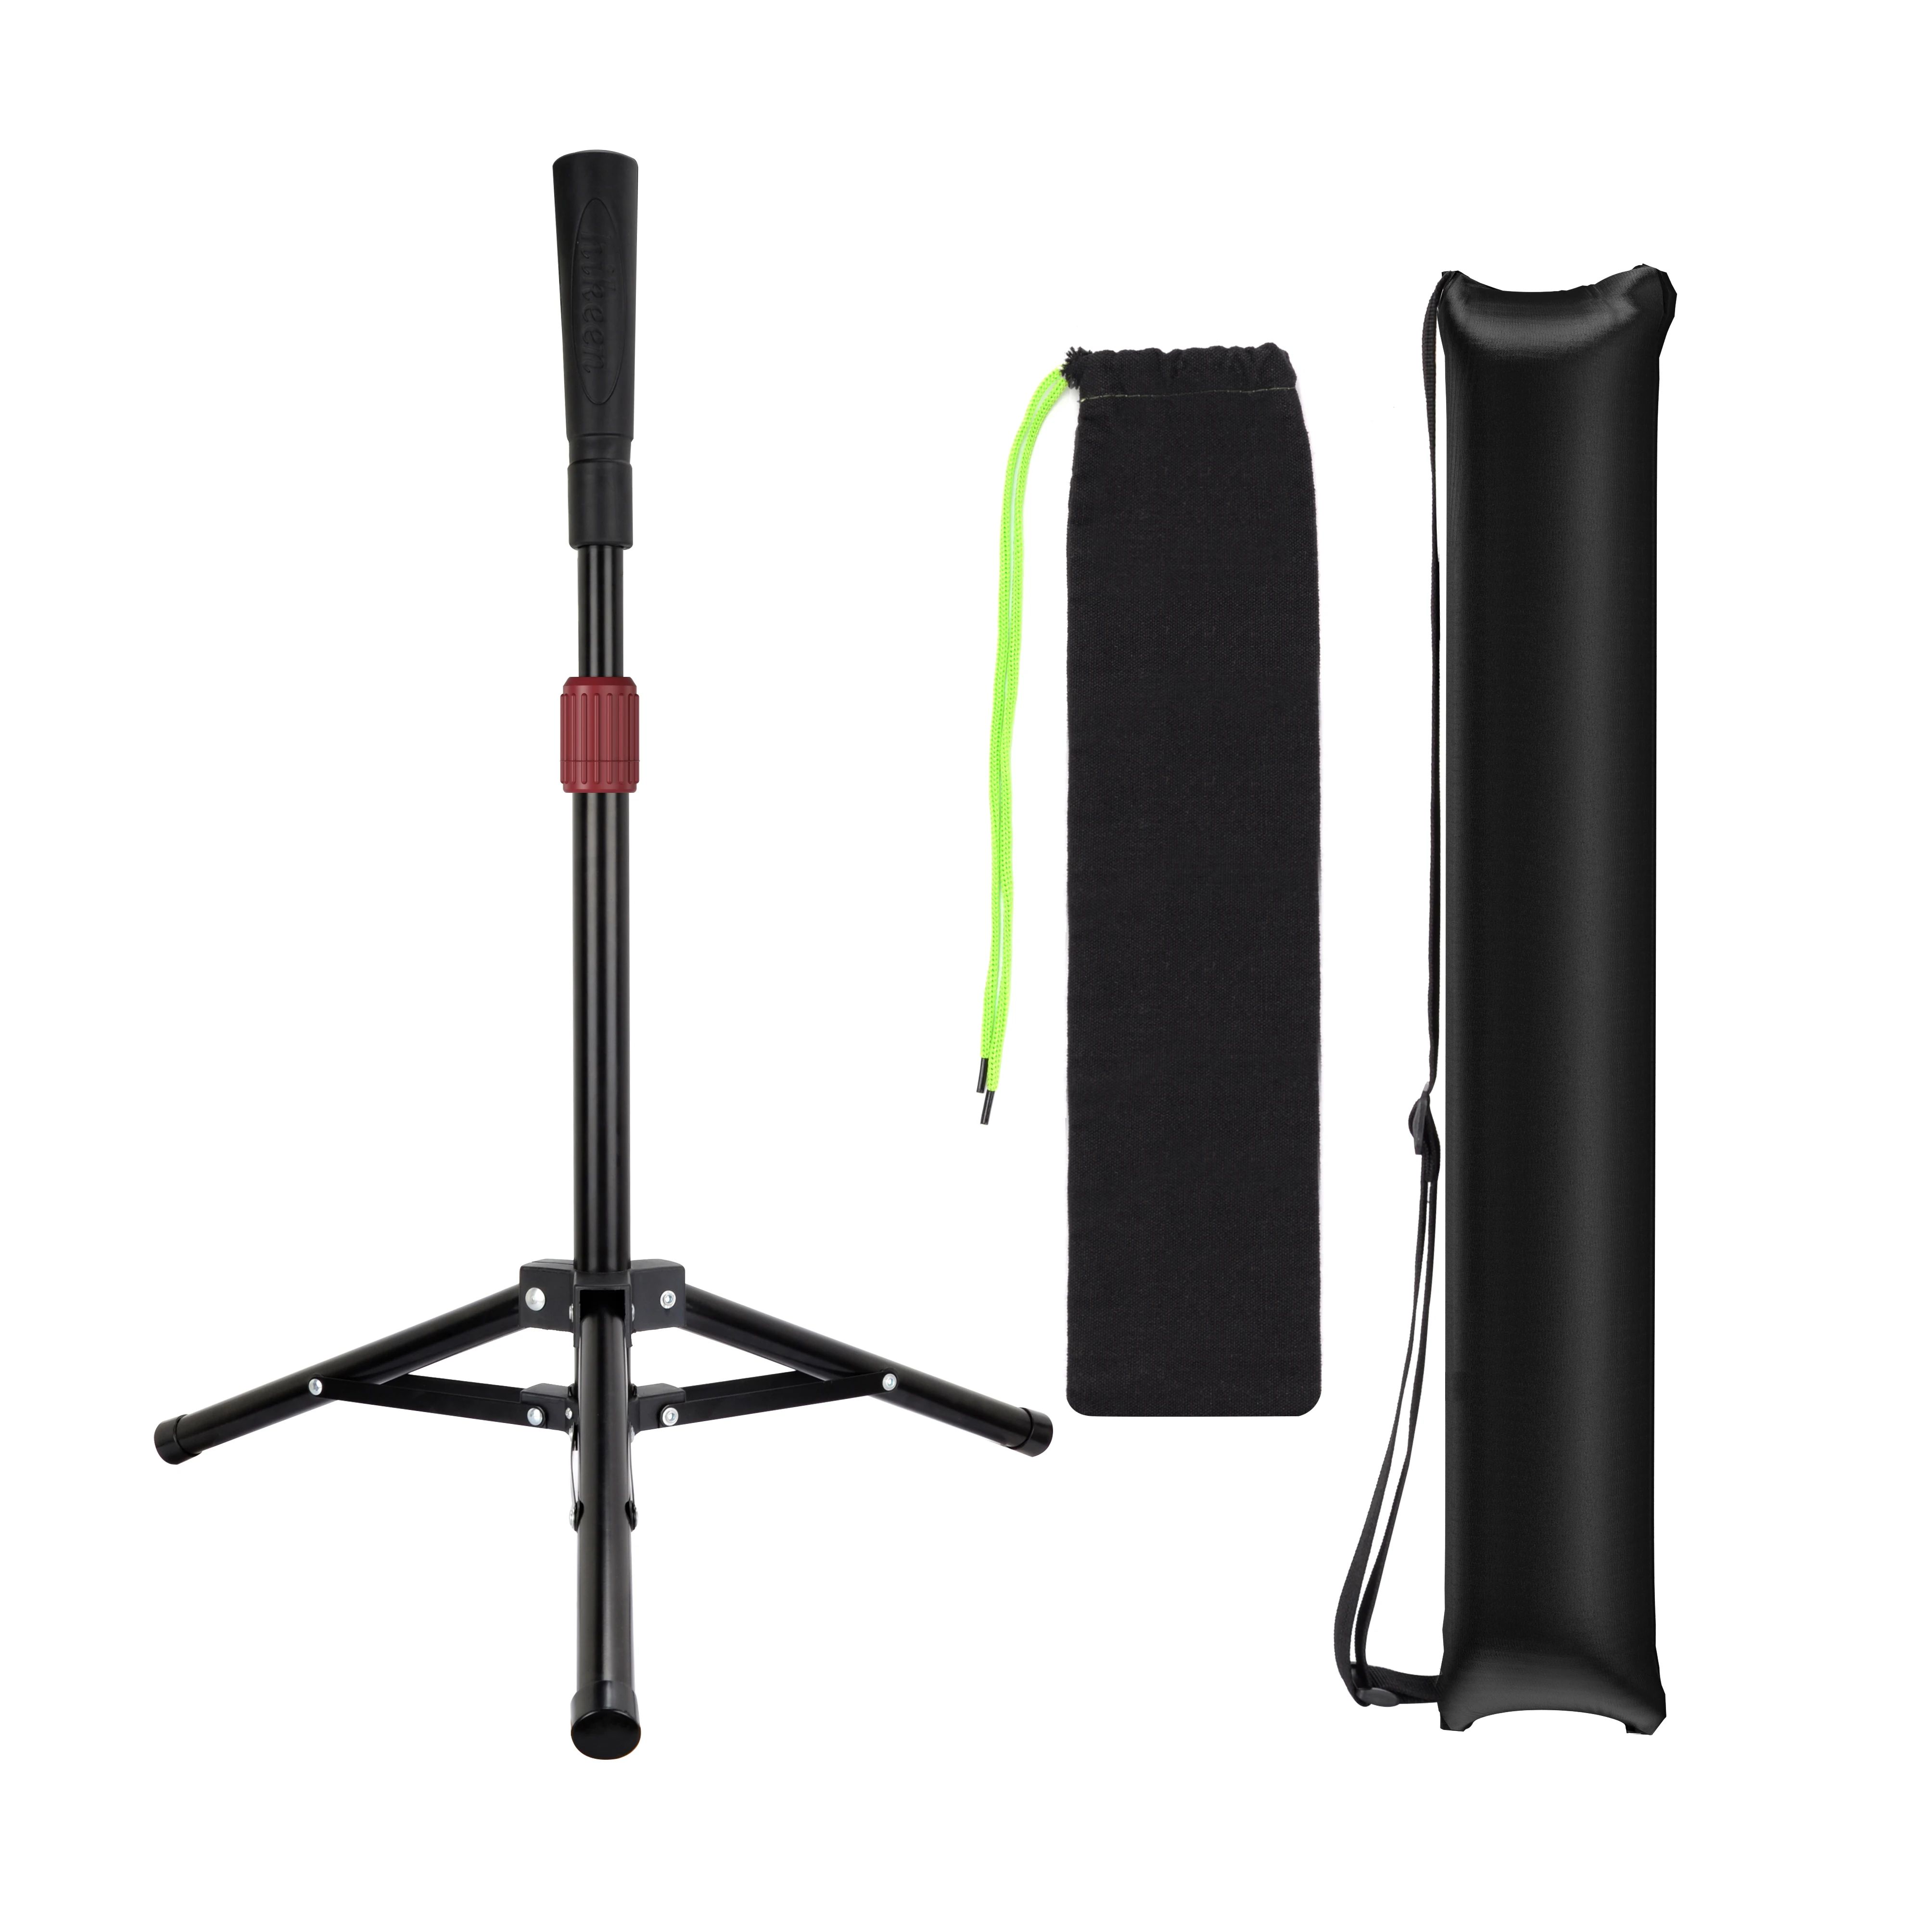 

Adjustable Baseball Tee Batting Softball T Stand Portable Tripod Mount Training Accessories With Bag For Hitting Ball Practice